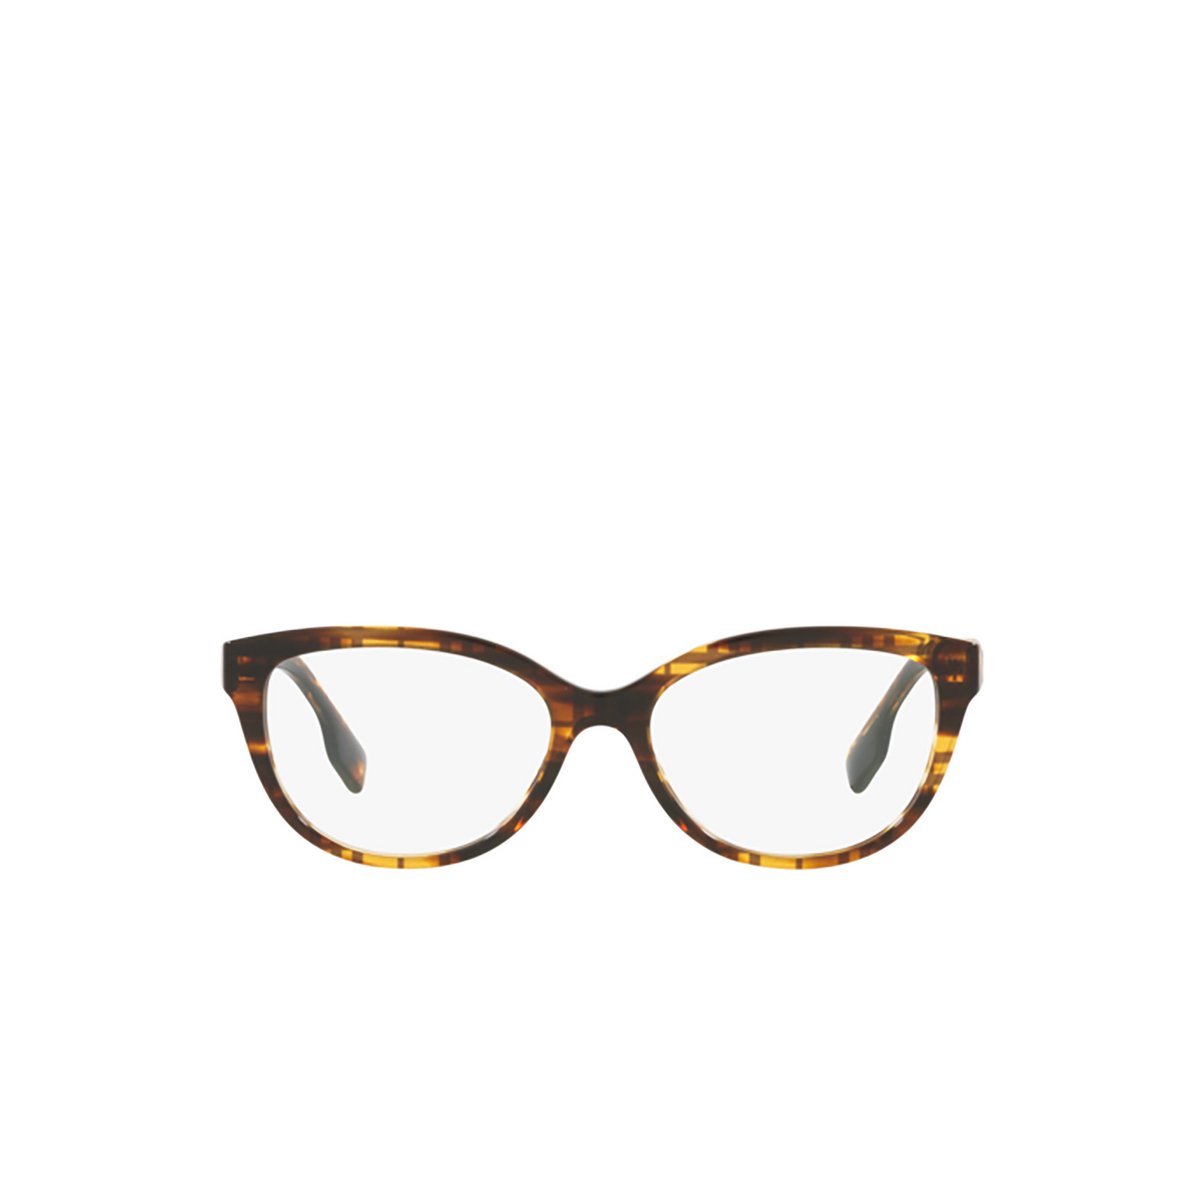 Burberry ESME Eyeglasses 3981 Top Check / Striped Brown - front view